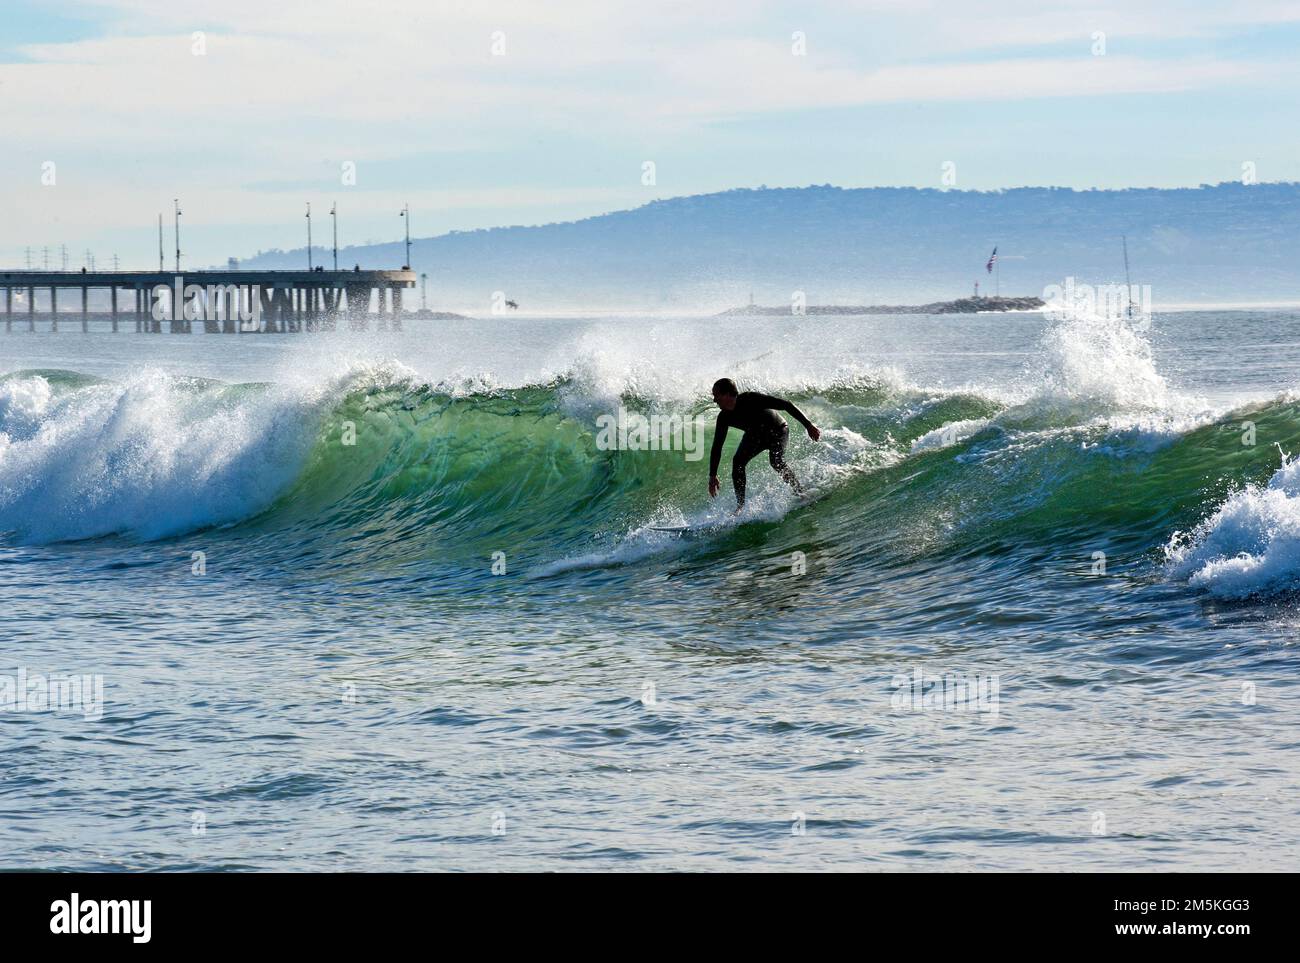 Surfer riding a wave near the Venice Pier with the Palos Verdes peninsula in the background in Southern California. Stock Photo